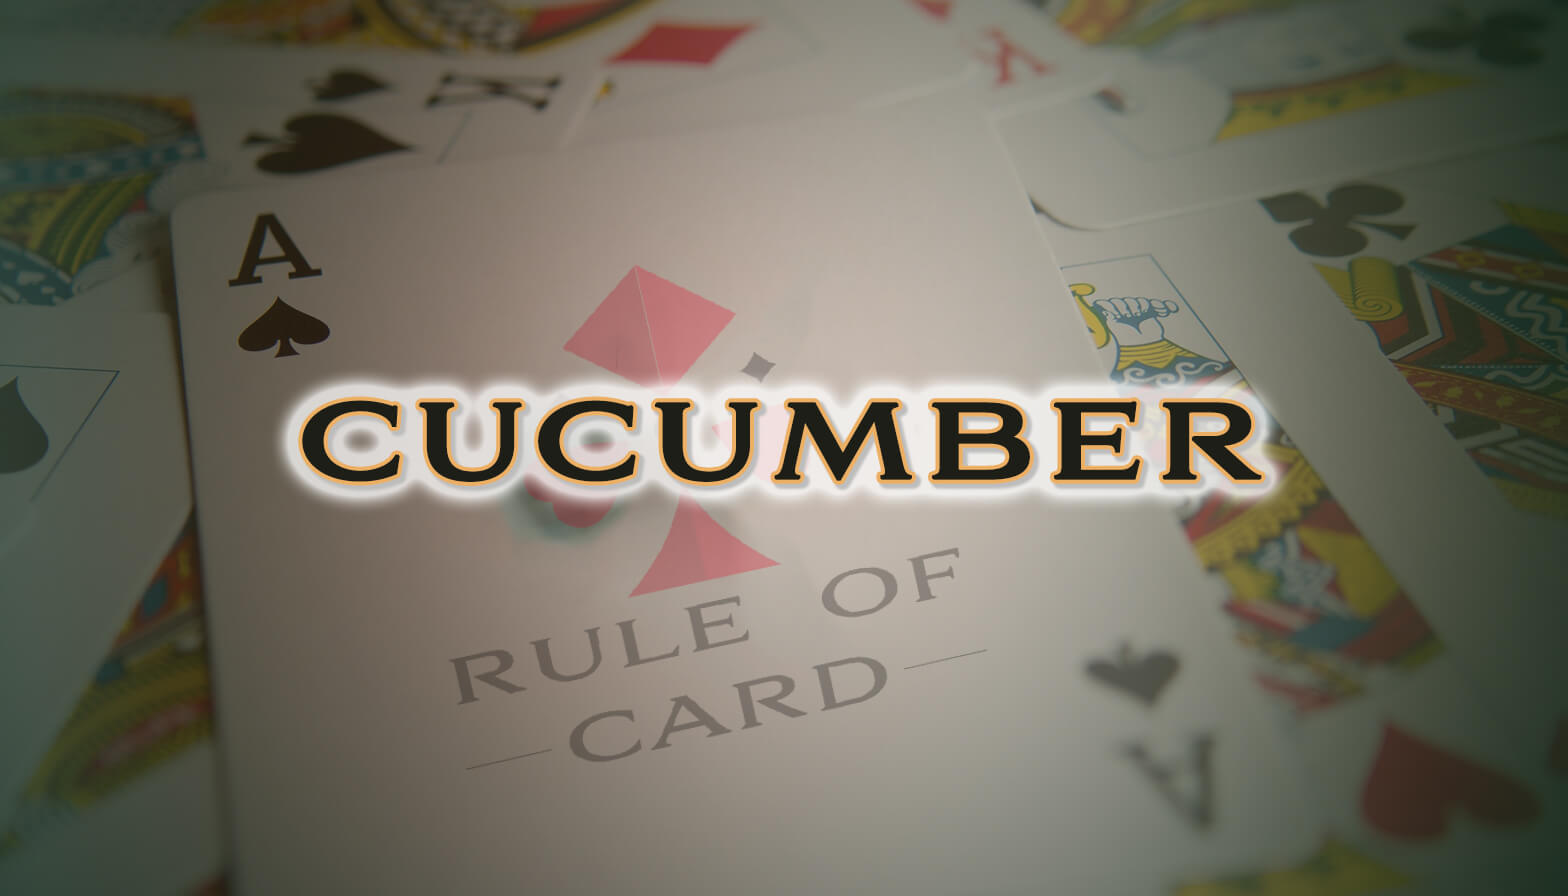 Playing the card game Cucumber